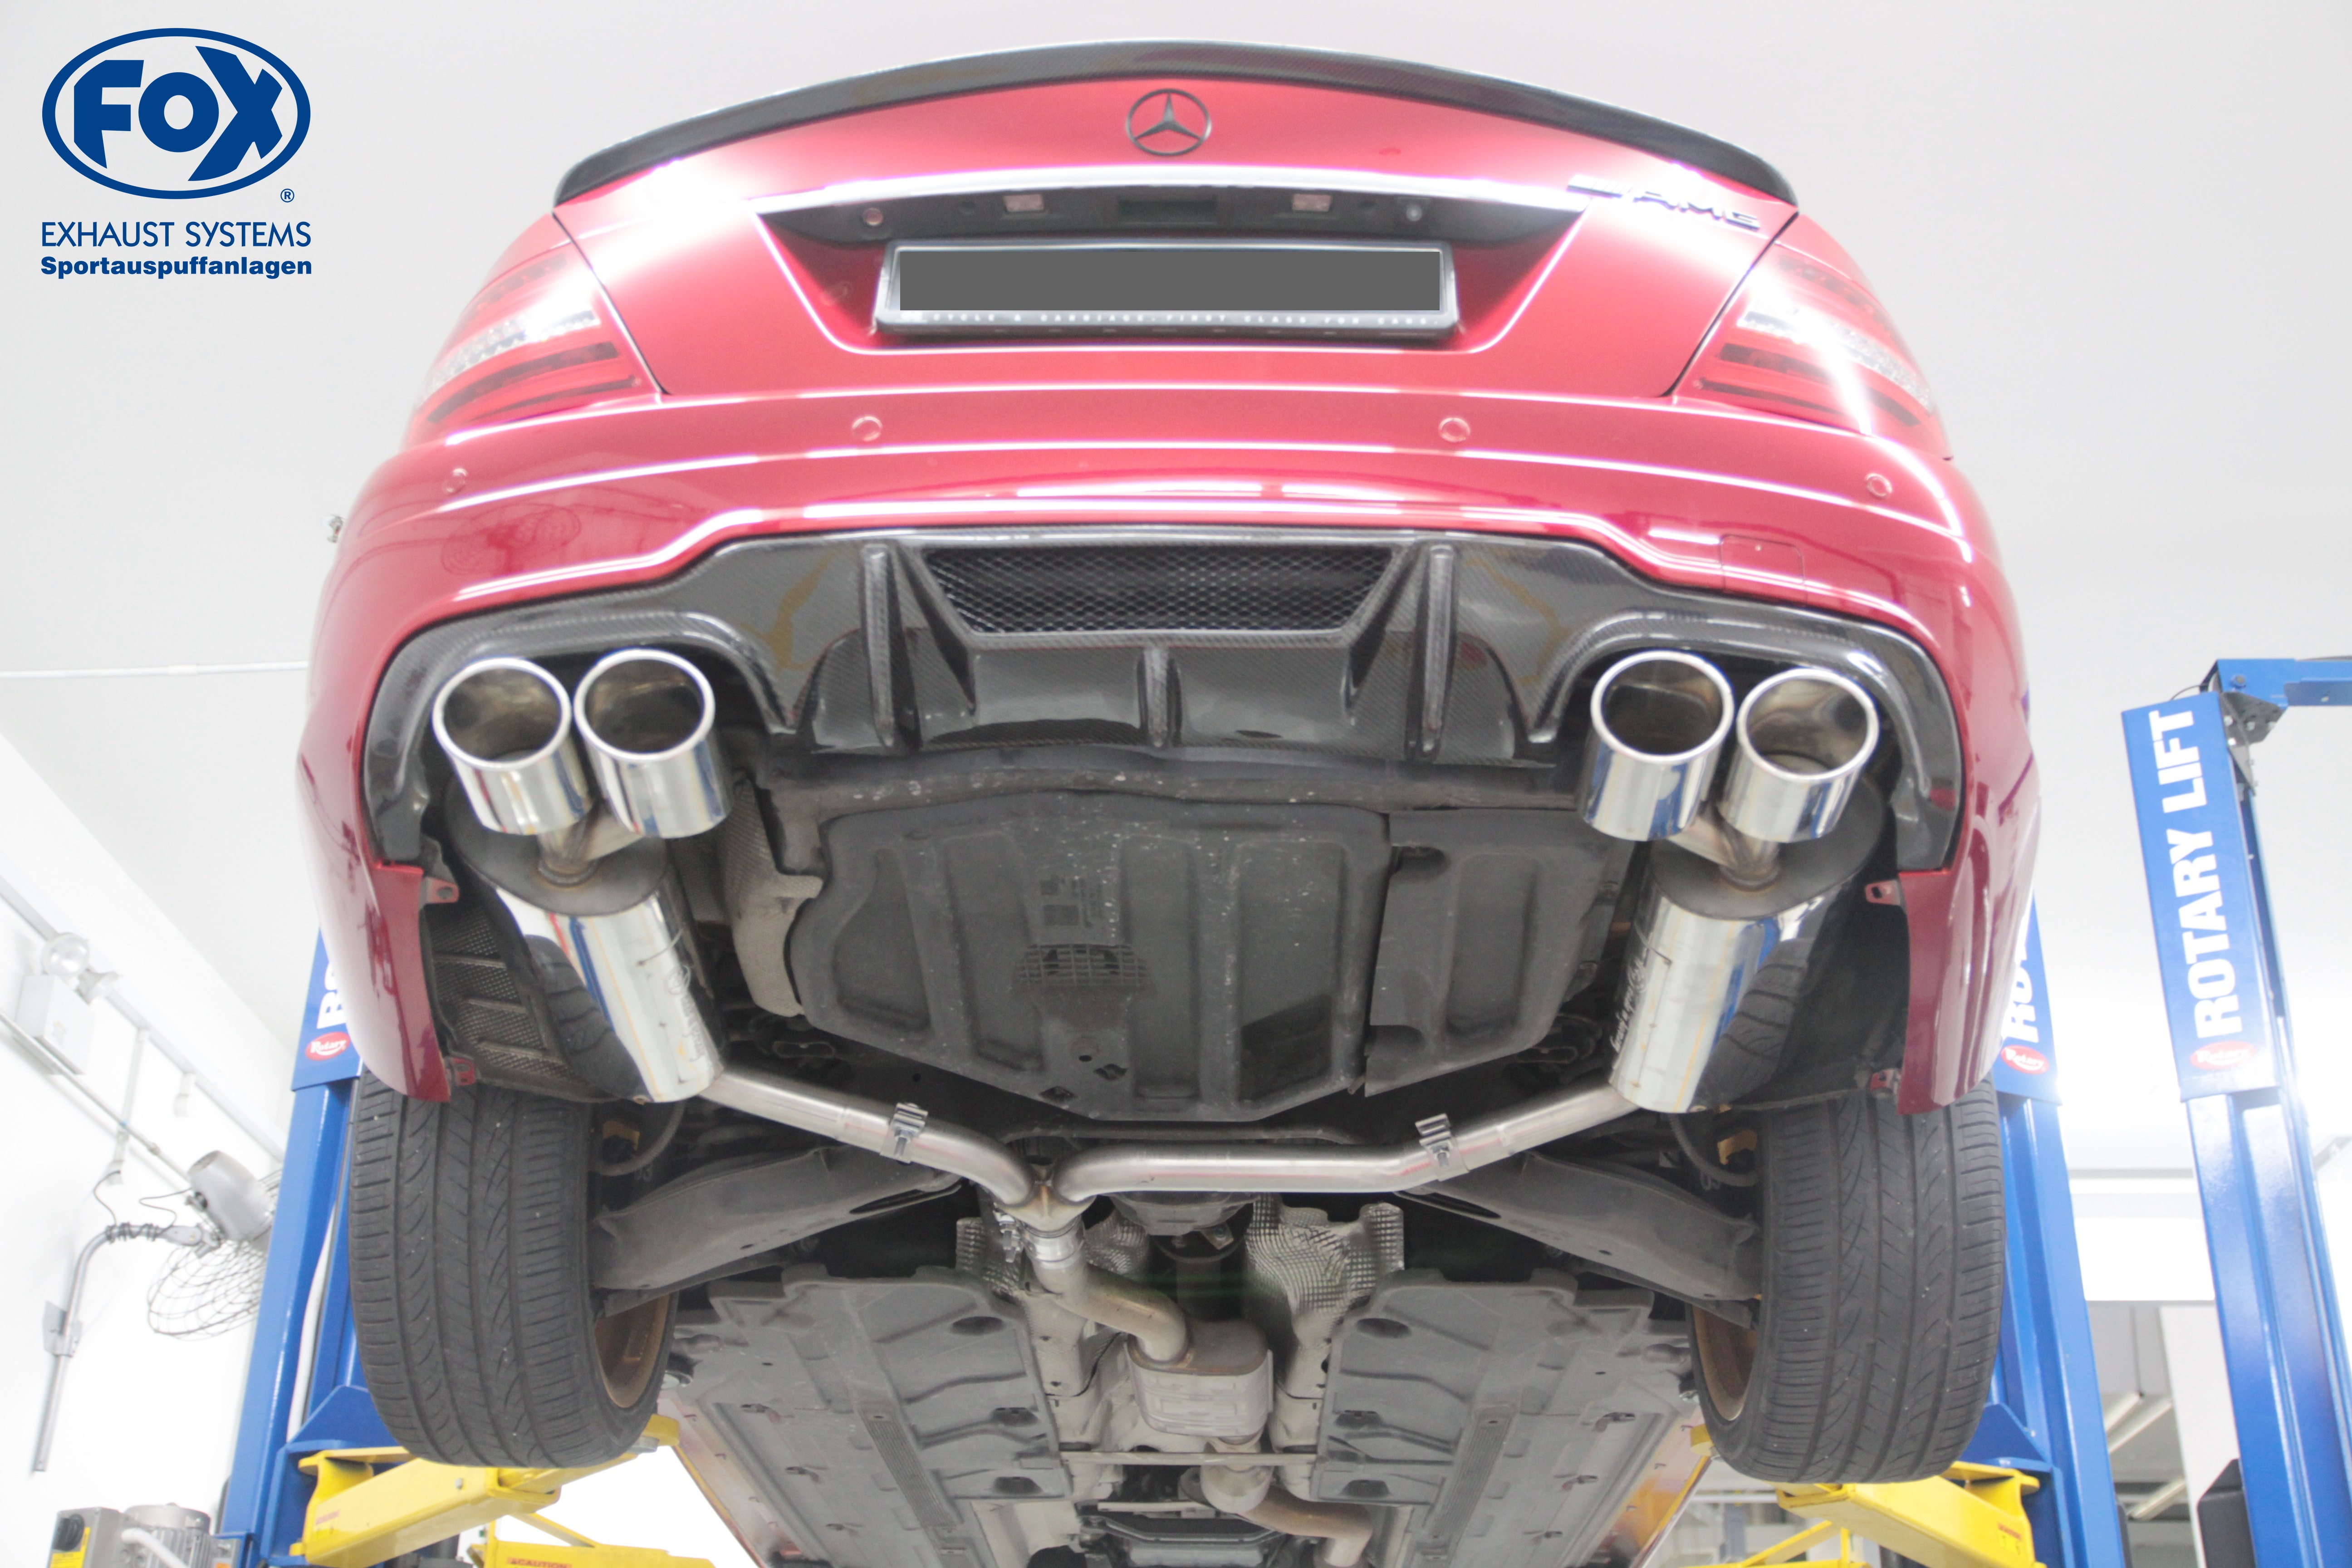 LTA Approved FOX Exhaust System for Mercedes W204 C Class